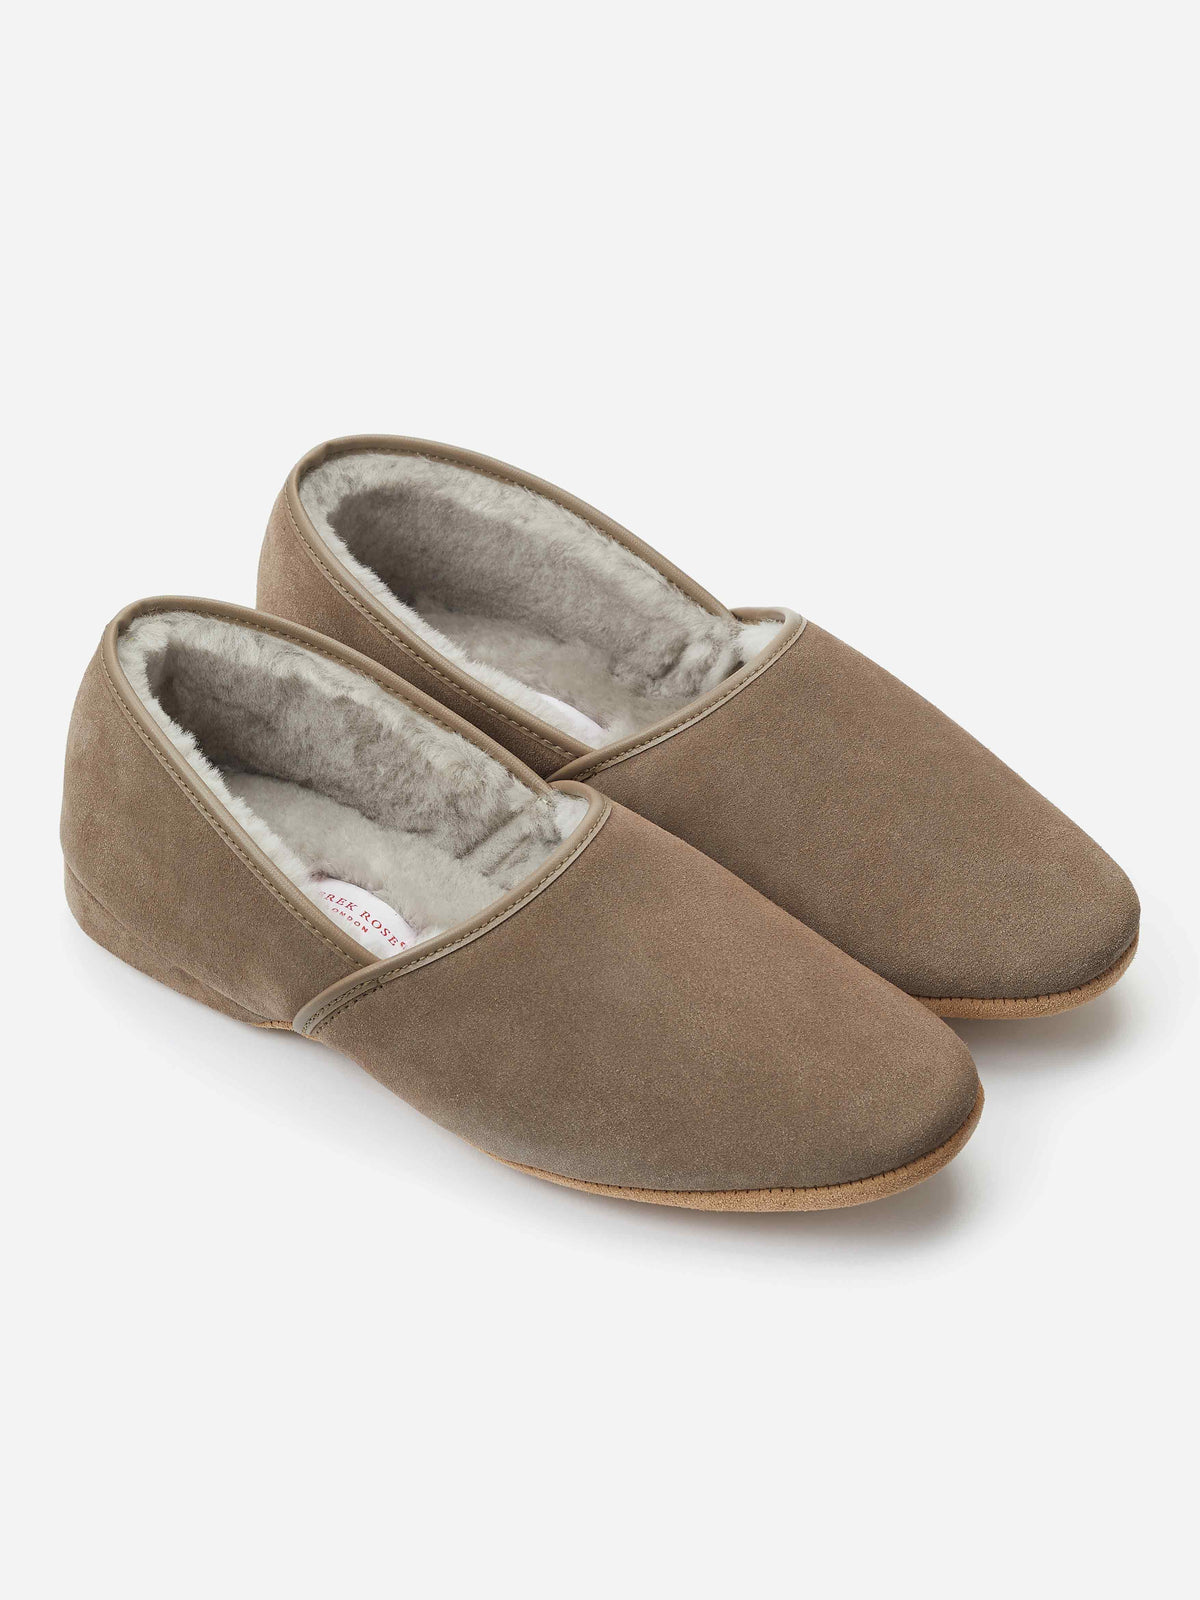 hush puppies ace slippers